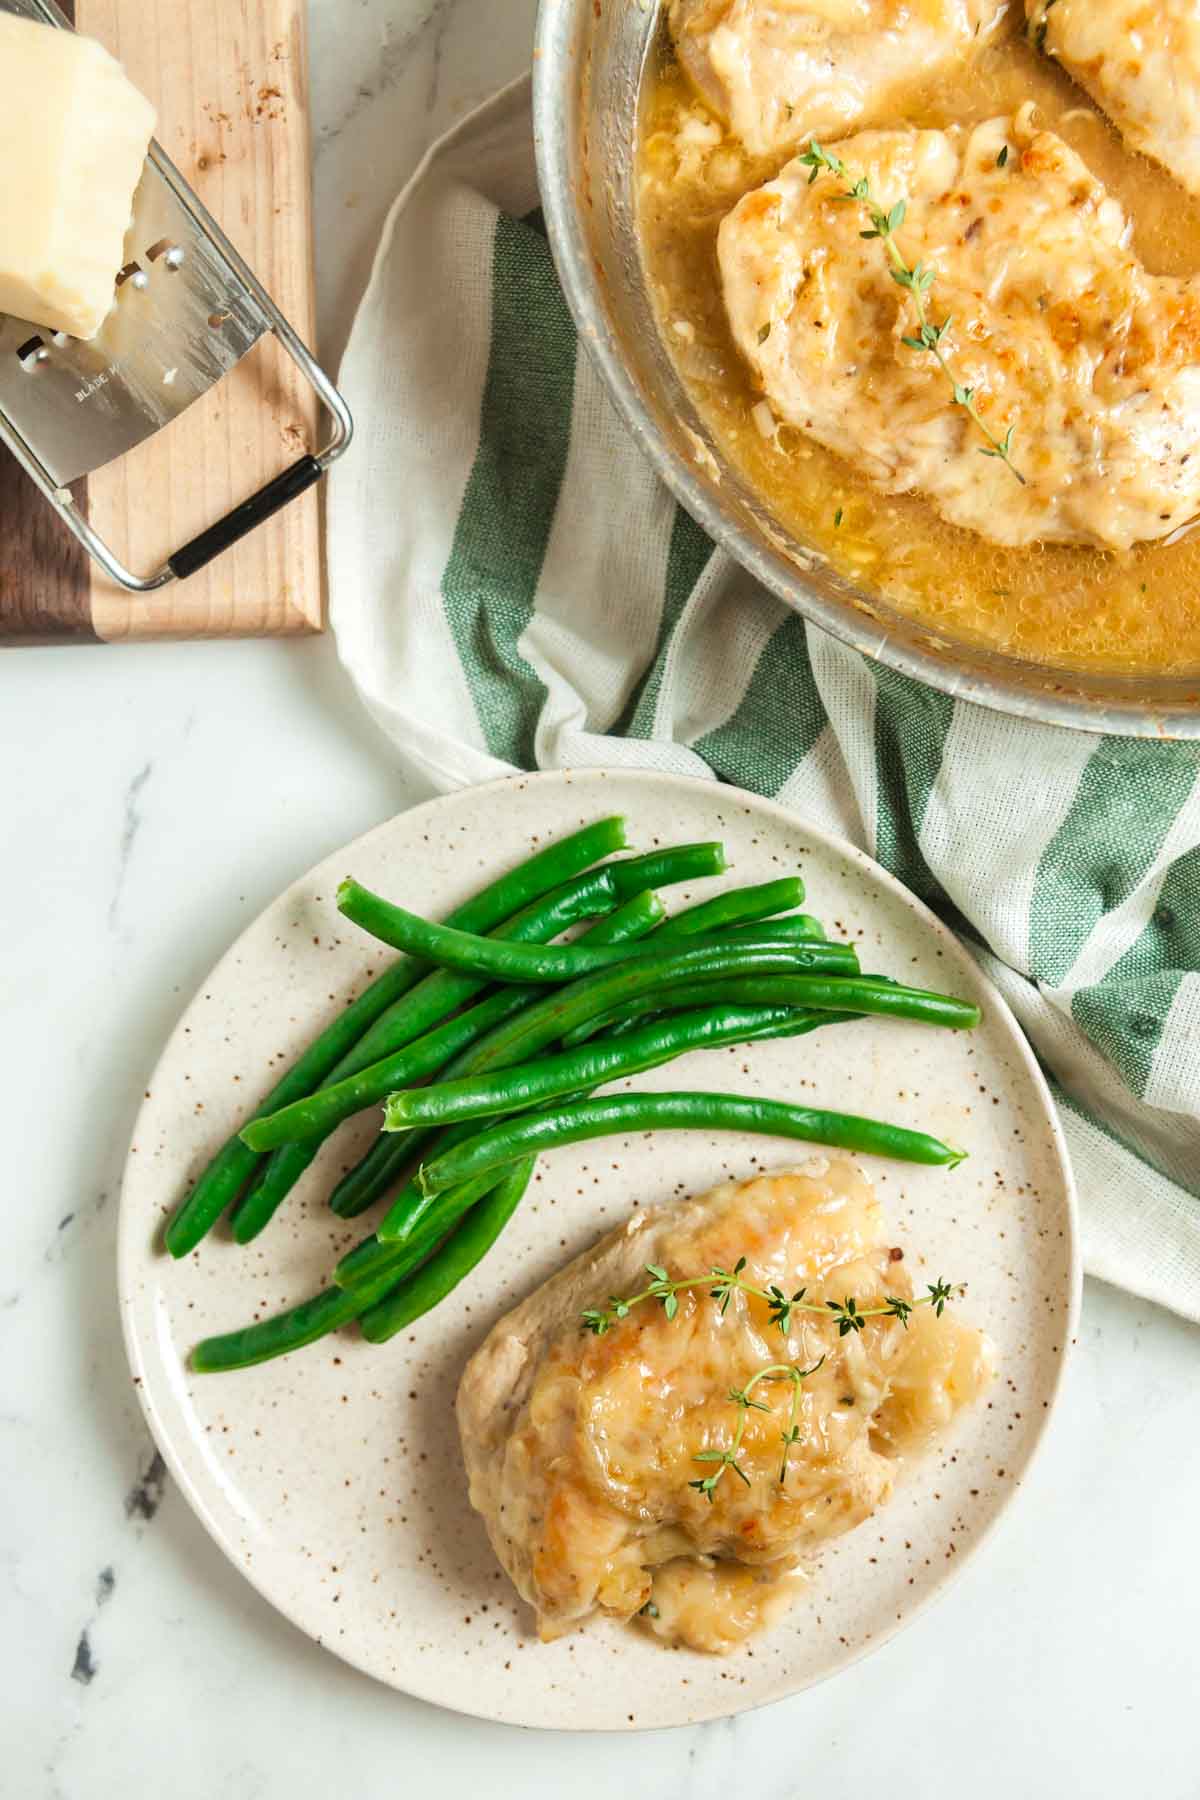 Overhead view of a plate of skillet French onion chicken breasts smothered with gruyere cheese and served with steamed green beans.